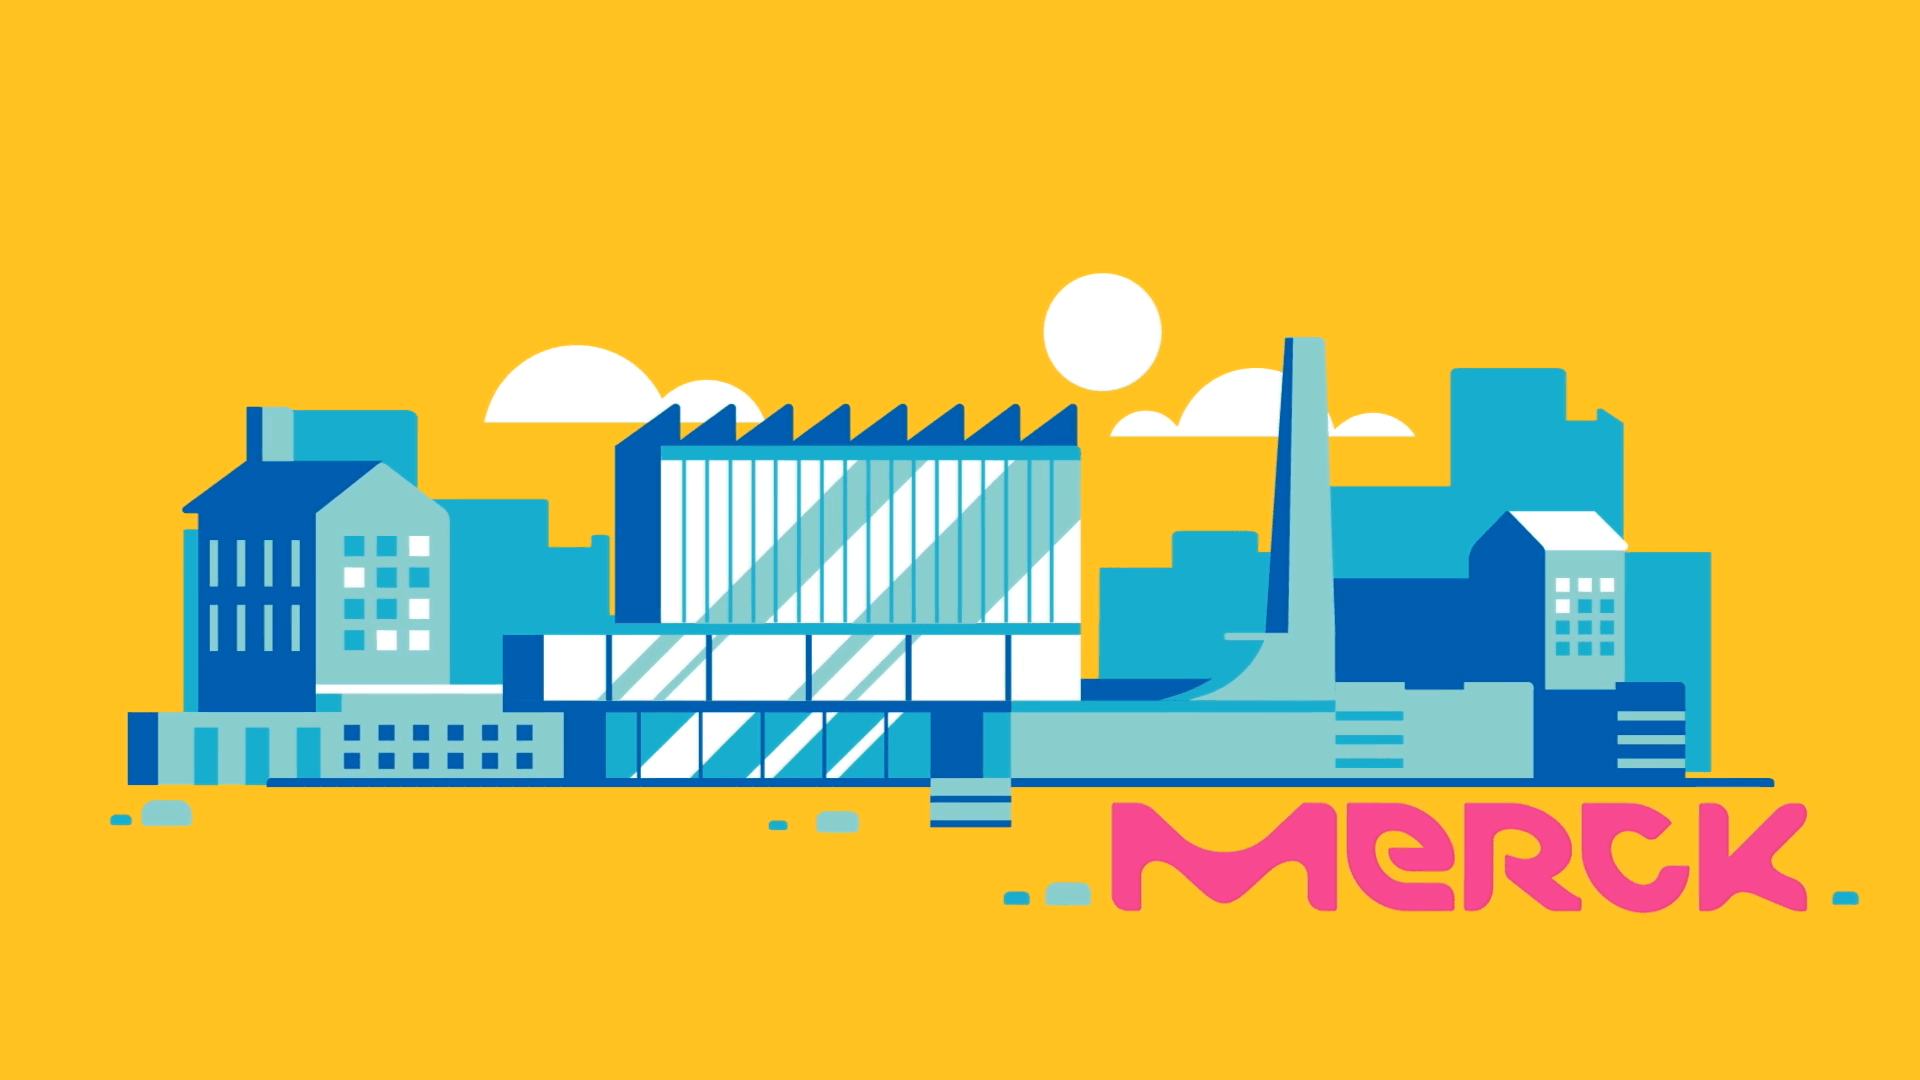 Merck Projects :: Photos, videos, logos, illustrations and